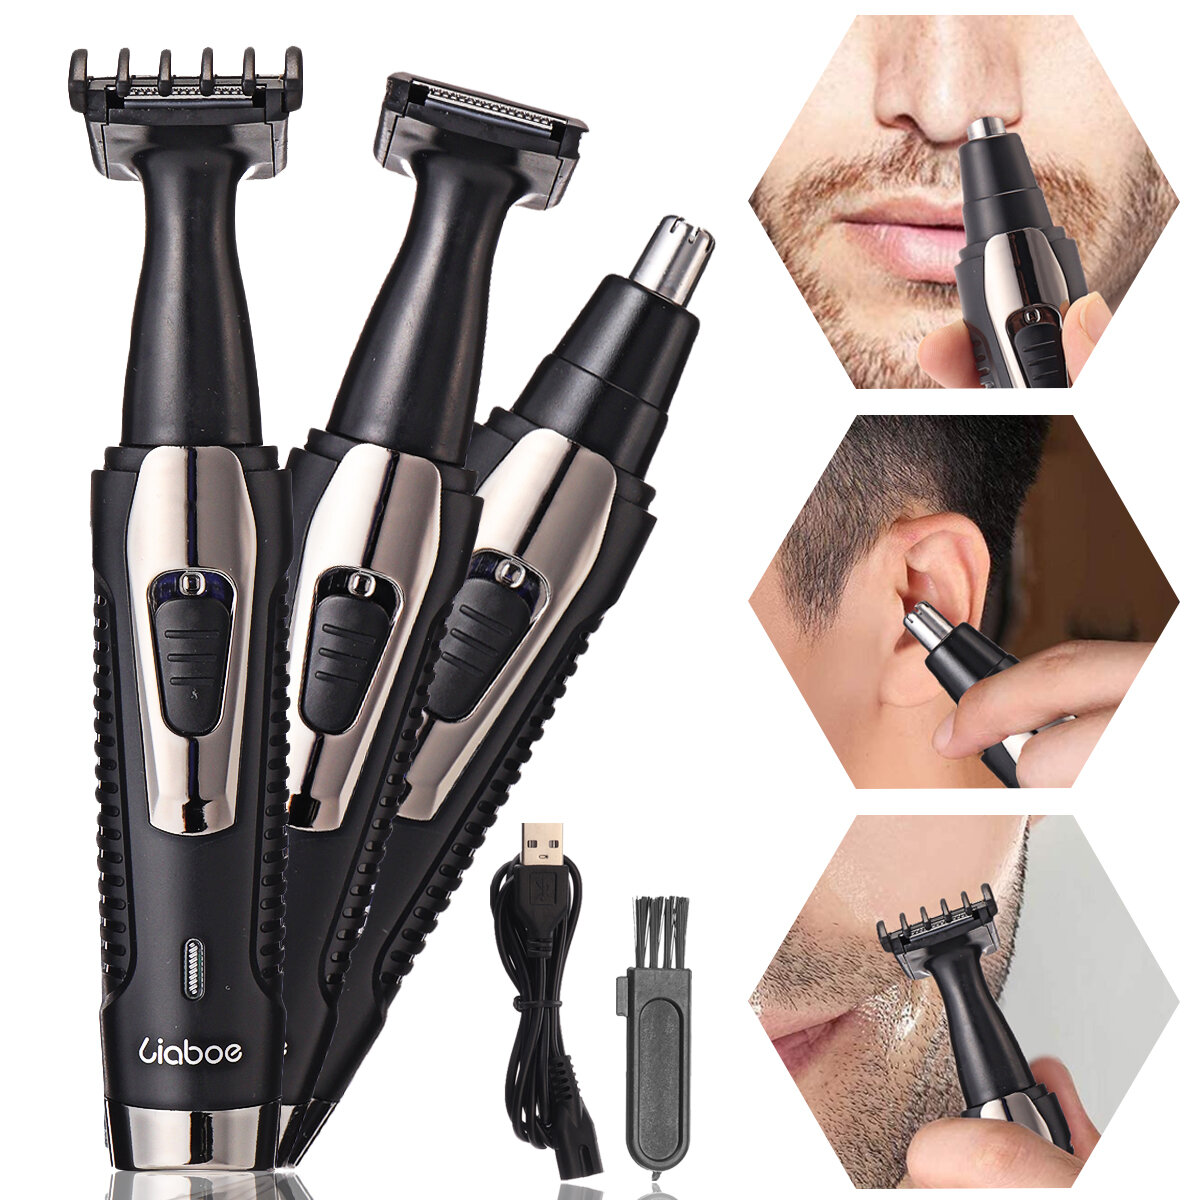 Beauty Nose Hair Trimmer for Men - Electric Facial Nose Ear Hair Remover Double Edge Stainless Steel Blades